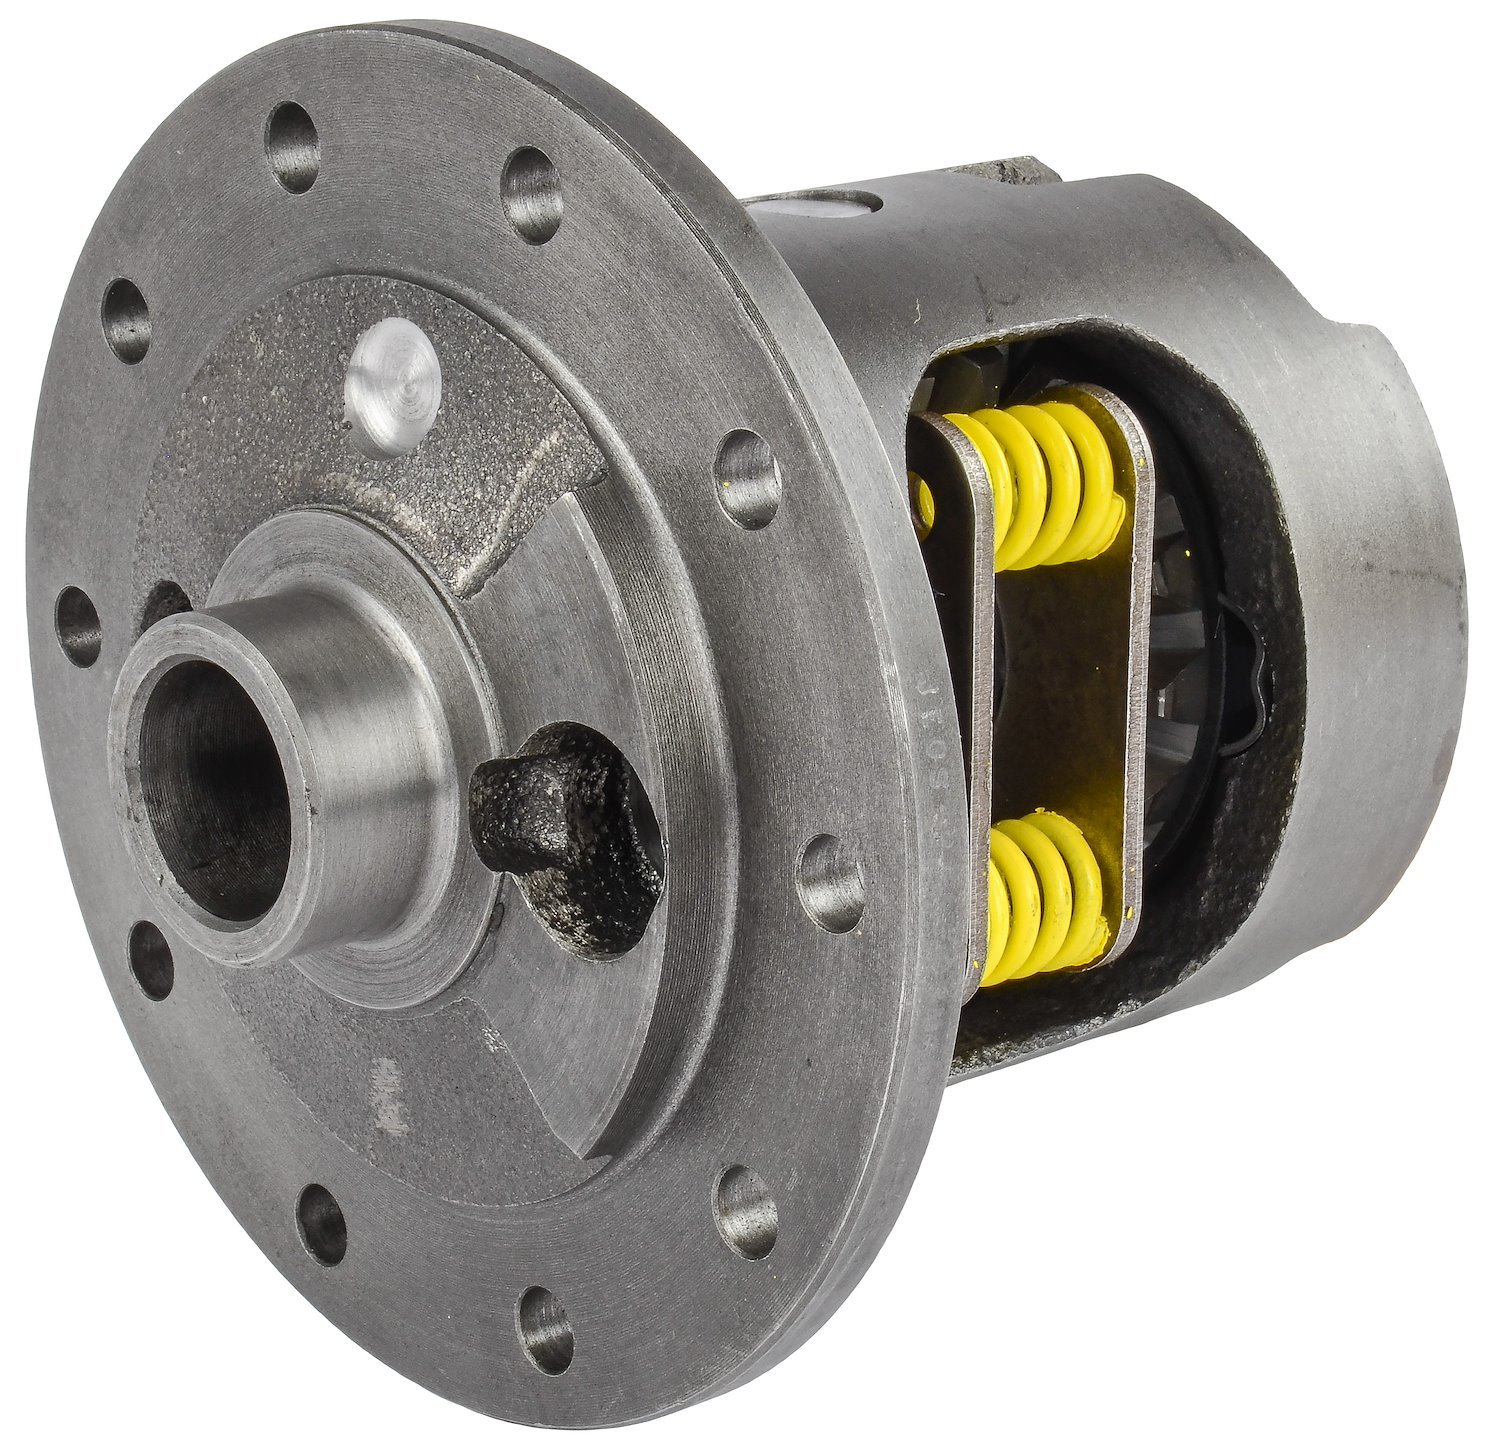 Posi Traction Differential for GM 8.500 in. 10-Bolt,